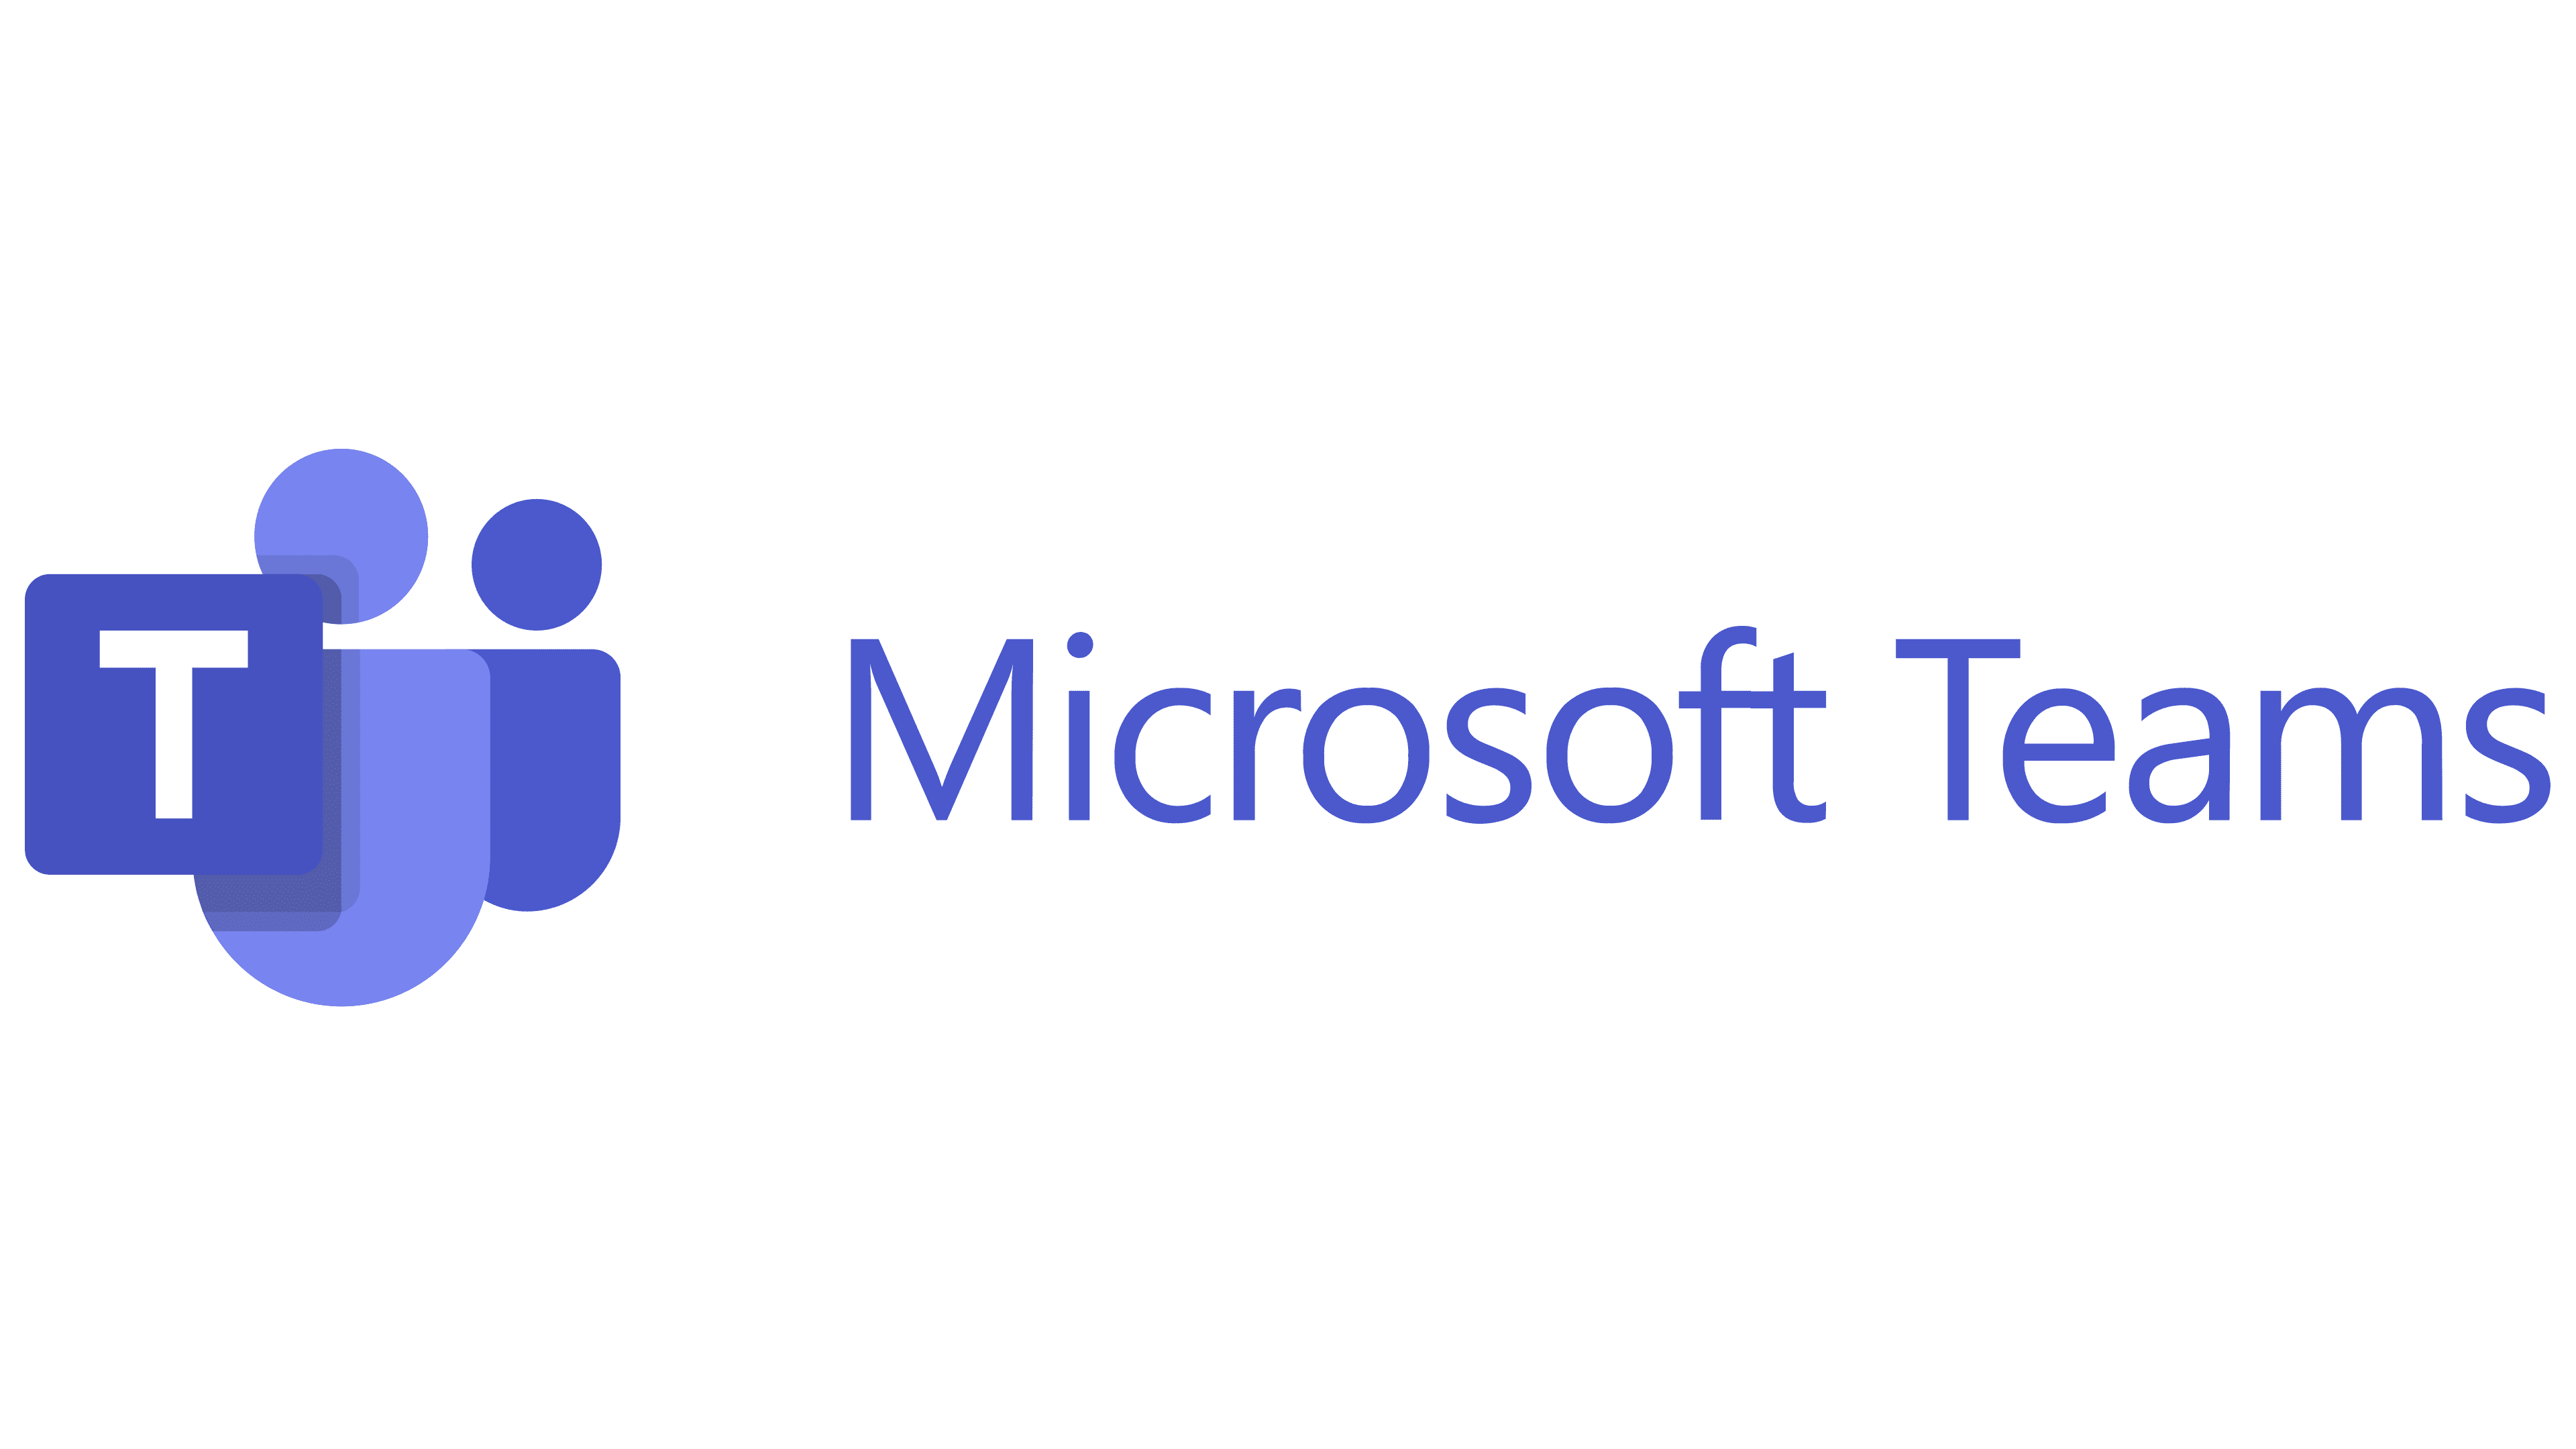 Microsoft Teams Logo - Microsoft Teams Logo, symbol, meaning